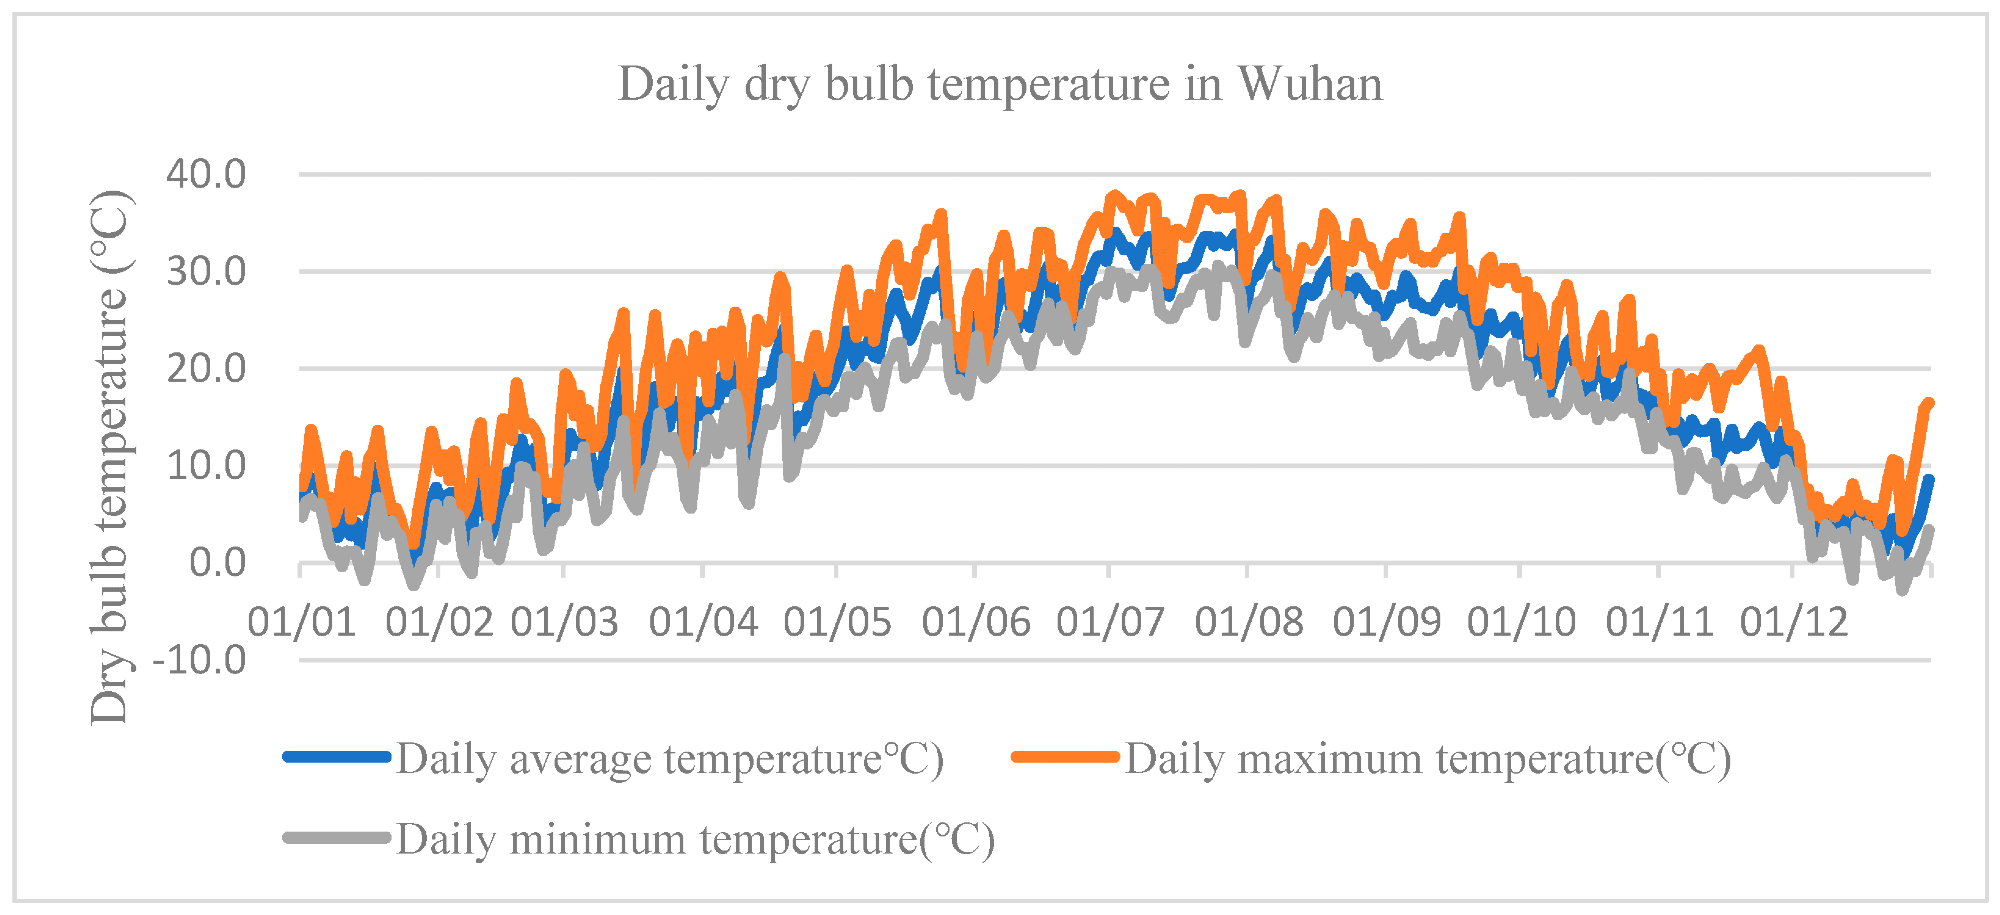 The statistics of daily dry bulb temperature in Wuhan.